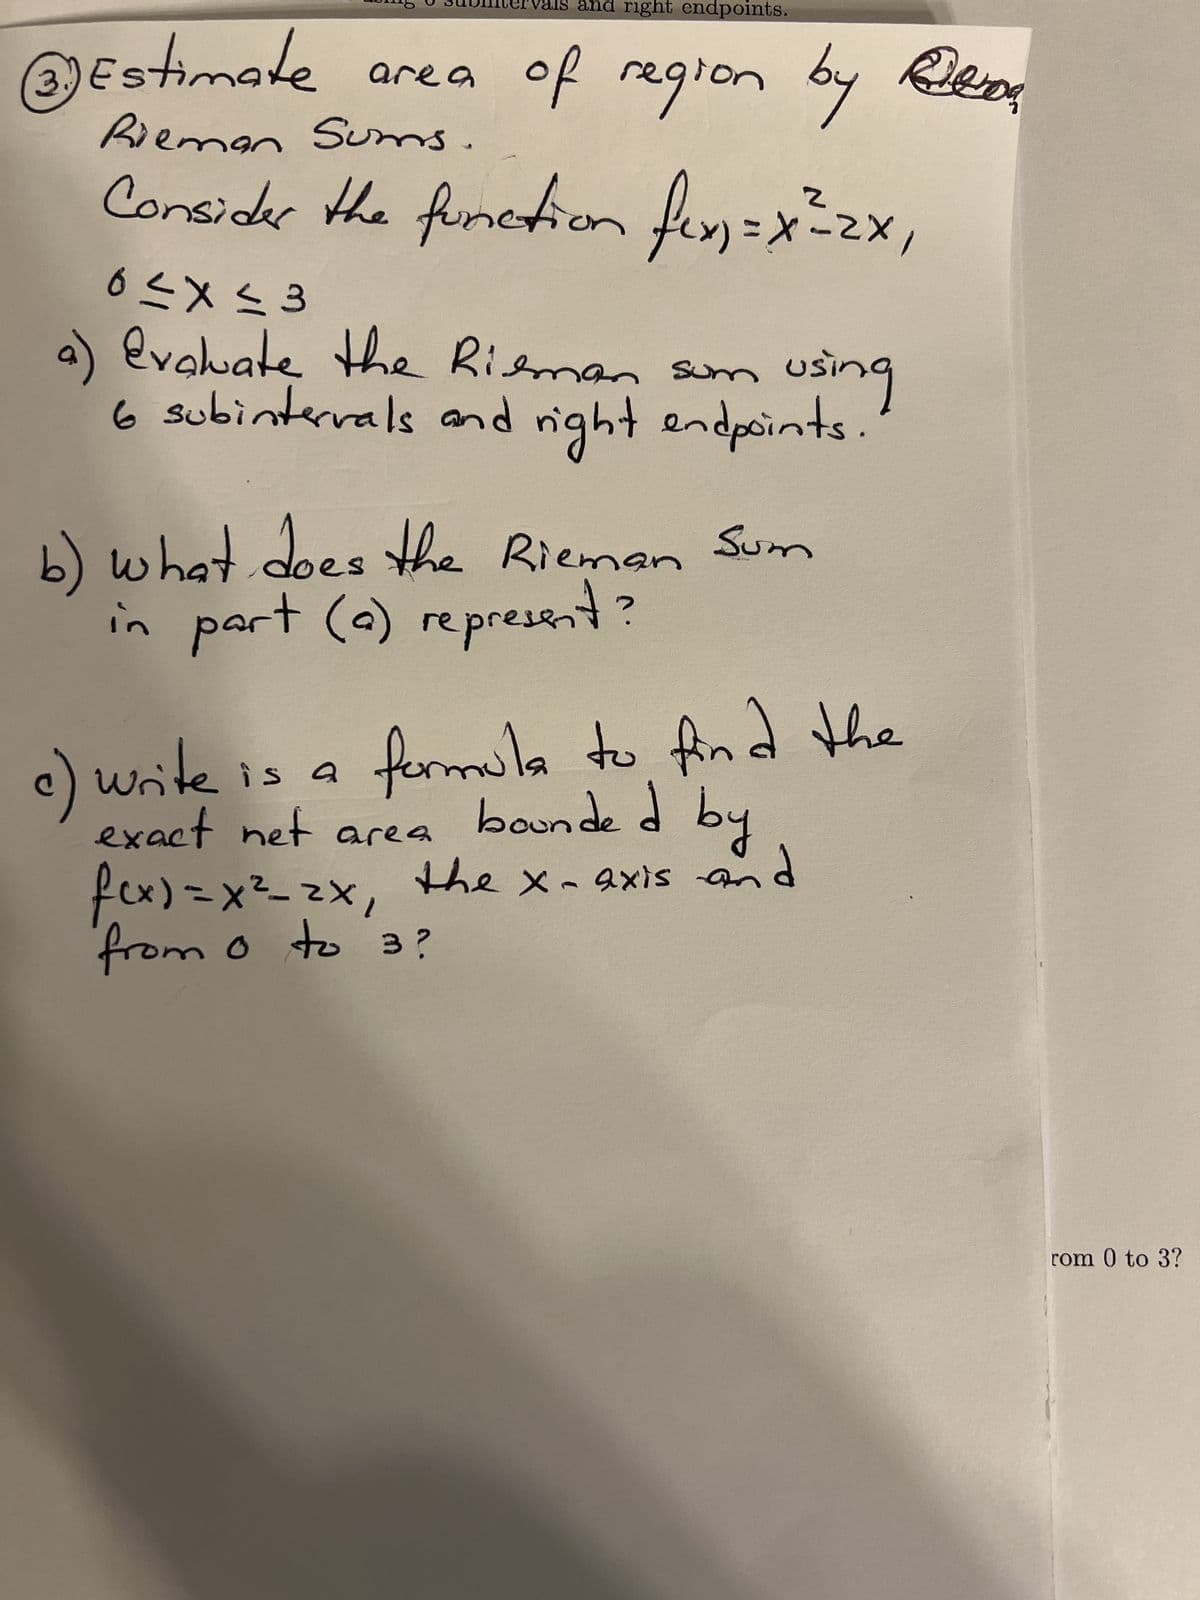 3.)
val and right endpoints.
Estimate area of region by Ben
Rieman Sums.
Consider the function fix=x²2x,
C
0≤x≤3
evaluate the Rieman som using
6 subintervals and right endpoints.
b) what does the Rieman Sum
in part (a) represent?
formula to find the
bounded by
the x-axis and
write is a
exact net area
f(x) = x²_2x₁
from 0 to 3?
"
rom 0 to 3?